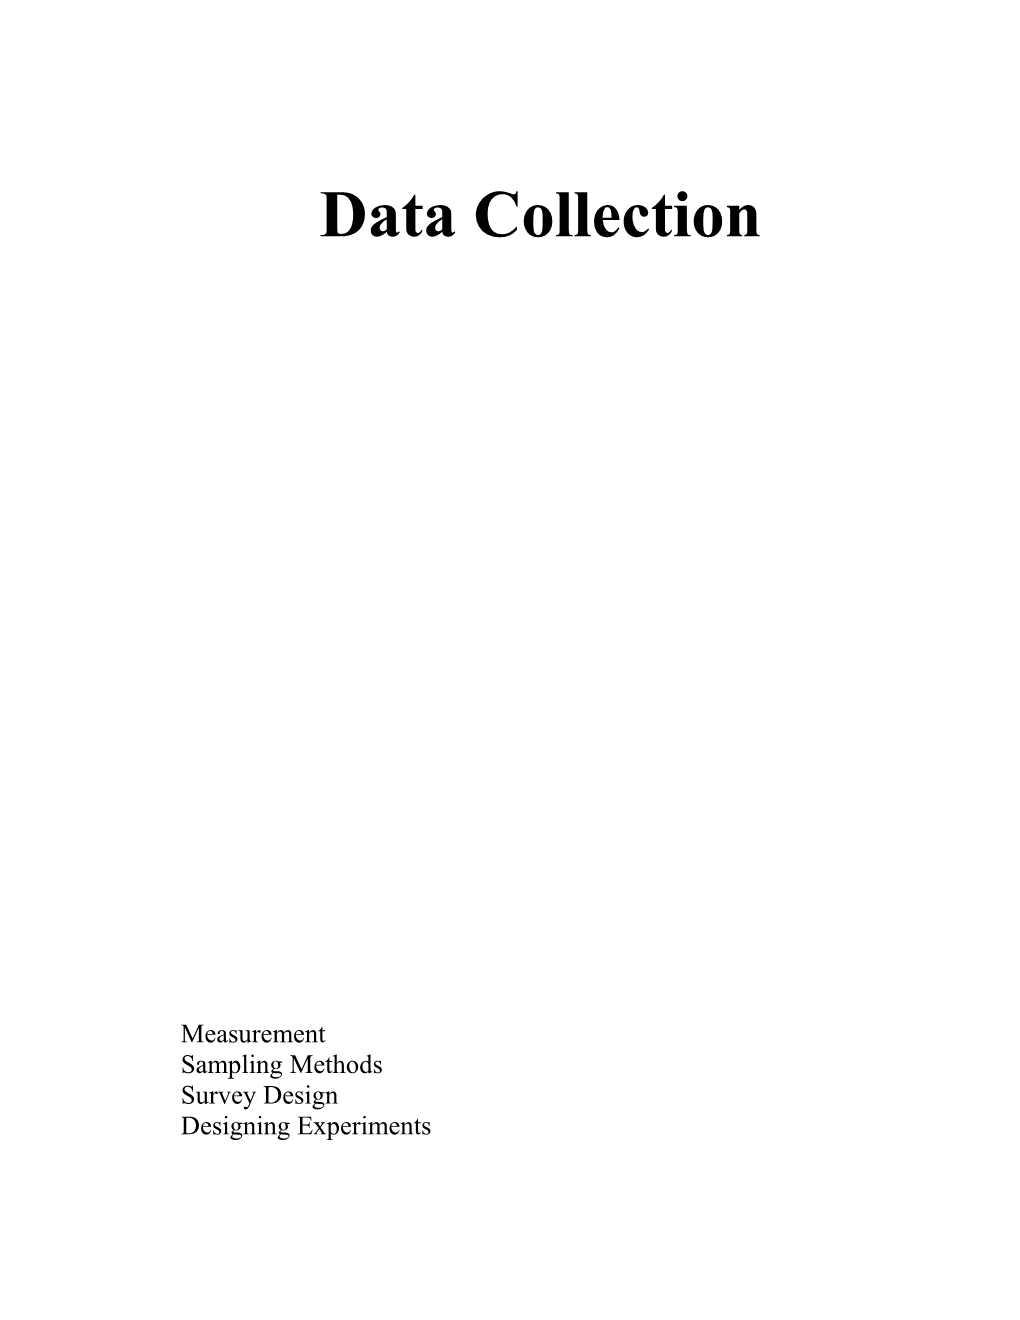 Data Collection - Short Version